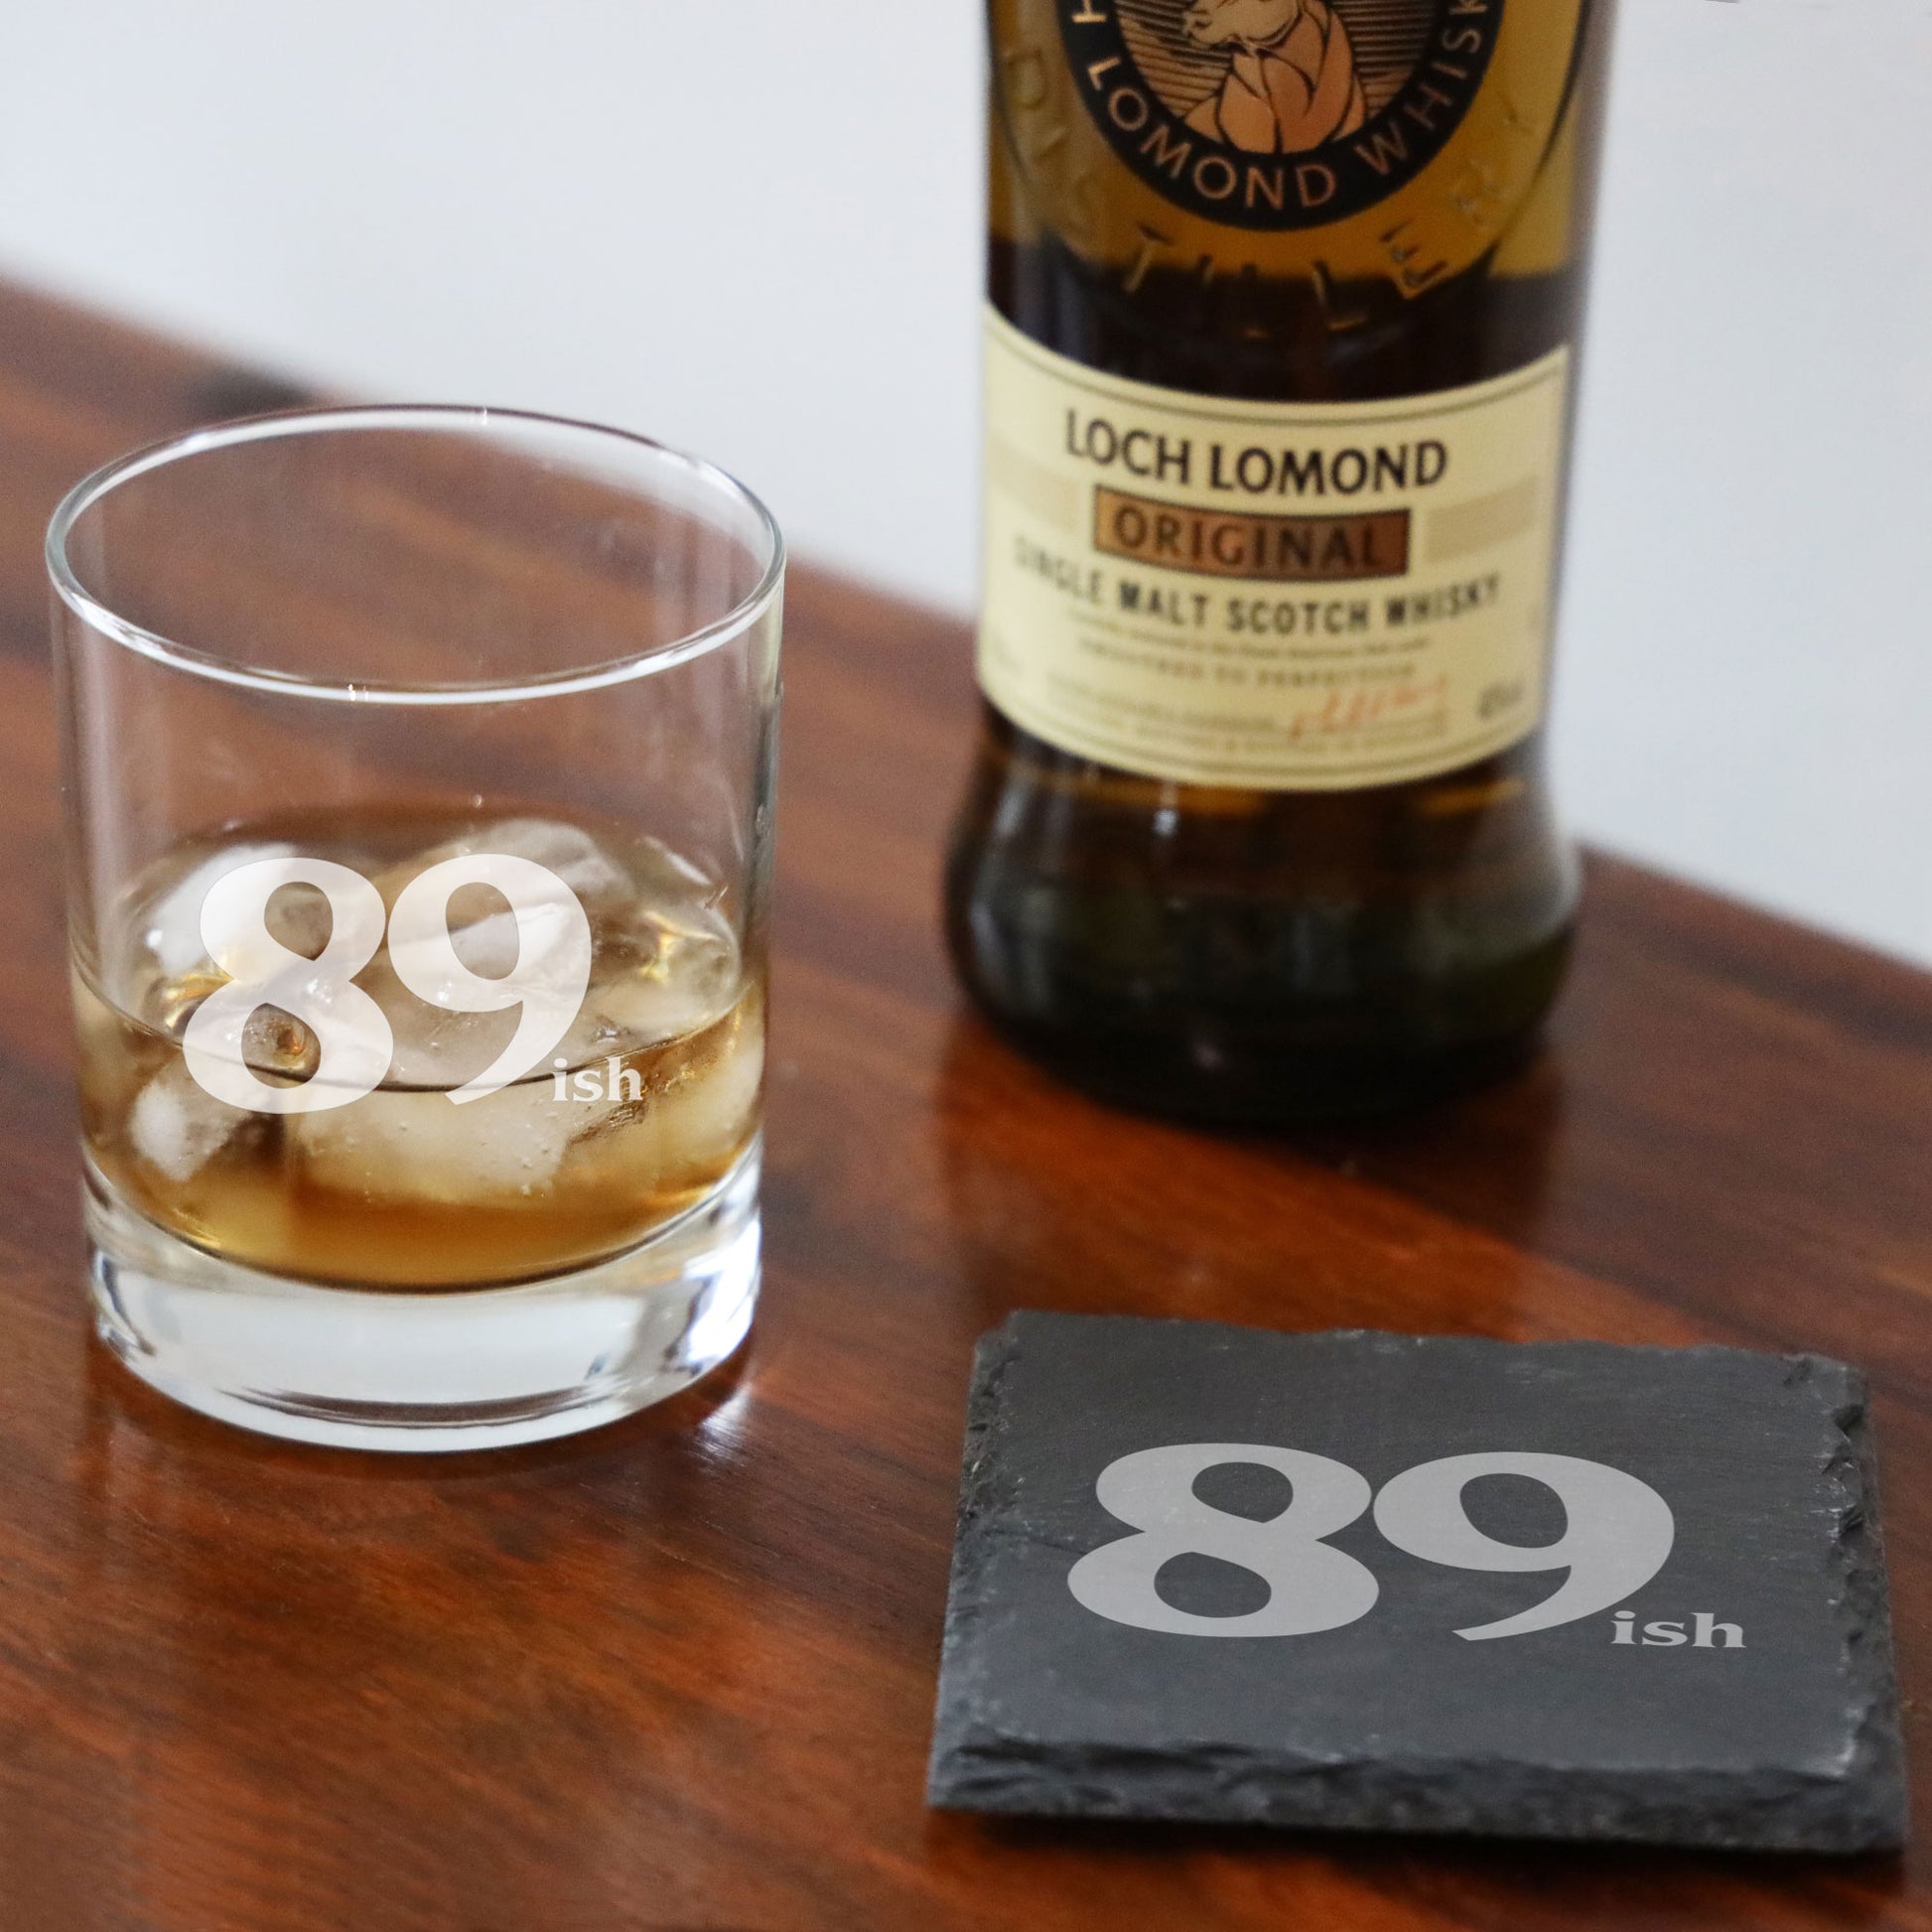 89ish Whisky Glass and/or Coaster Set  - Always Looking Good - Glass & Square Coaster Set  